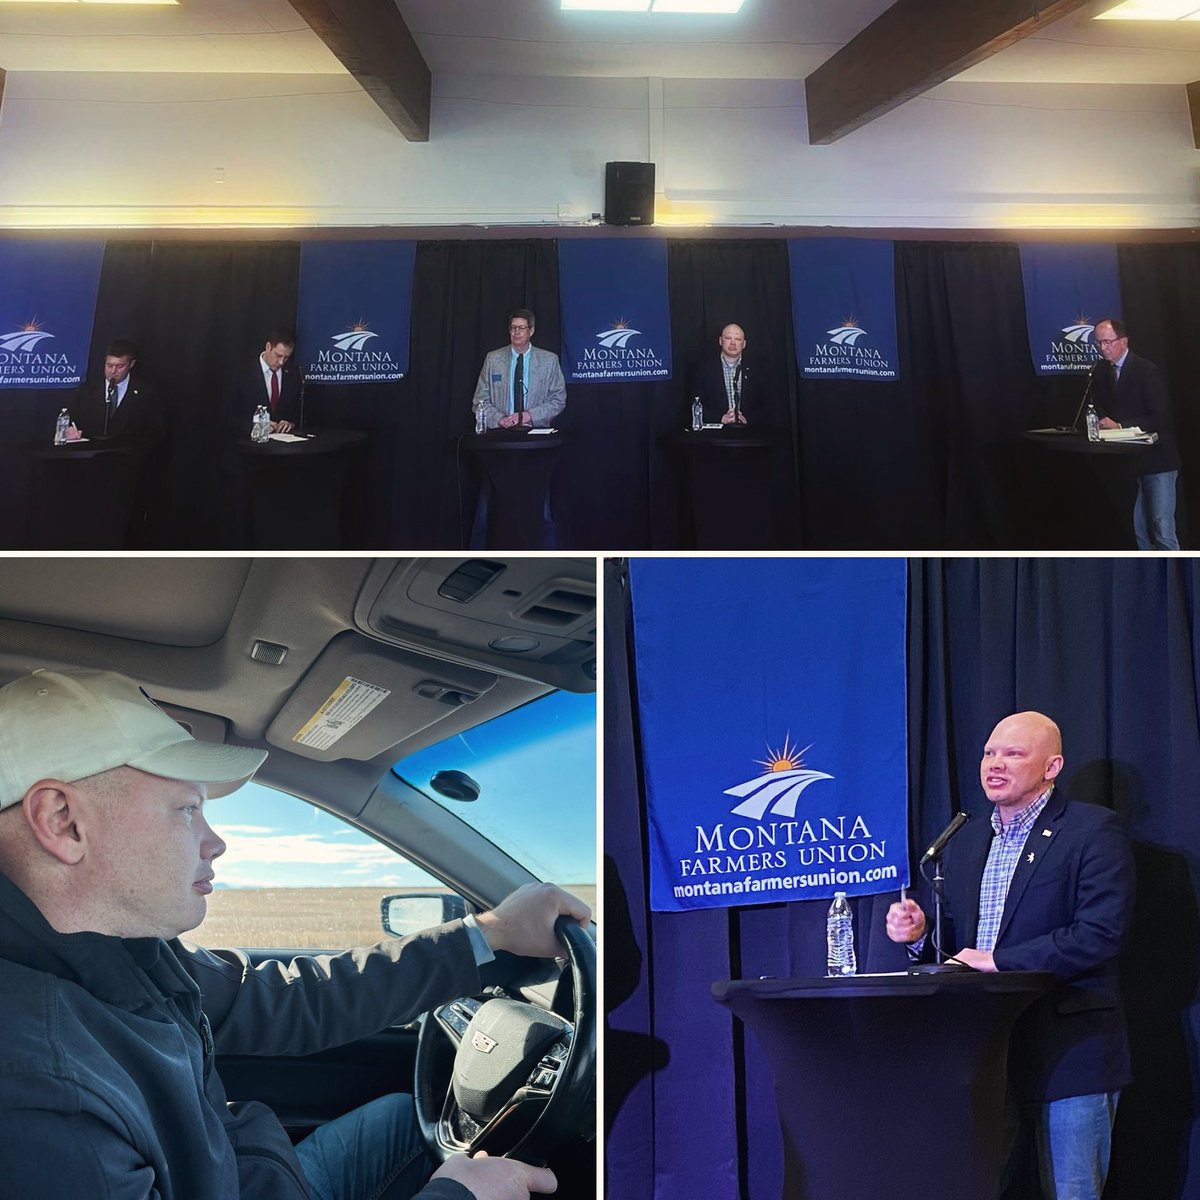 It was a bit of a journey from #Billings to #Havre for the @MFUfarmers Congressional debate on tv but I was glad to do it because I care about talking about the issues important to people in eastern and central #Montana. Leadership starts by showing up and being available. #mtpol